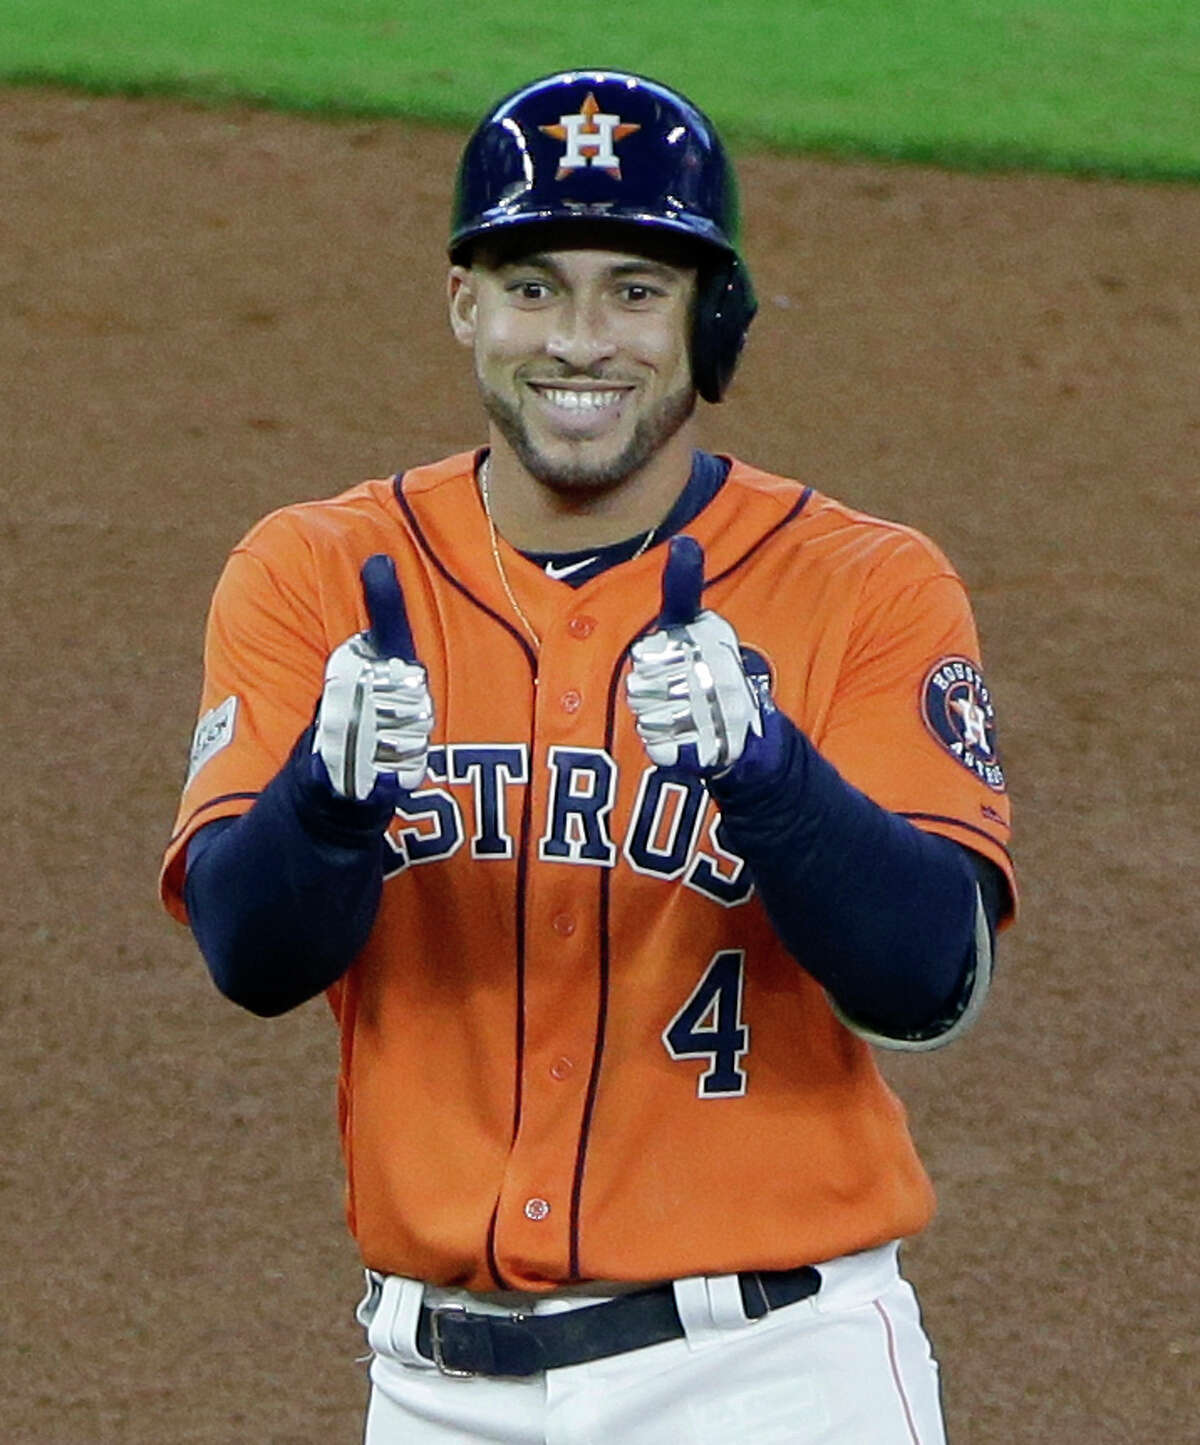 Houston Astros George Springer gives thumbs up as he stands on base after a double hit against the Boston Red Sox in Game 2 of the American League Division Series at Minute Maid Park on Oct. 6, 2017. ( Melissa Phillip / Houston Chronicle )